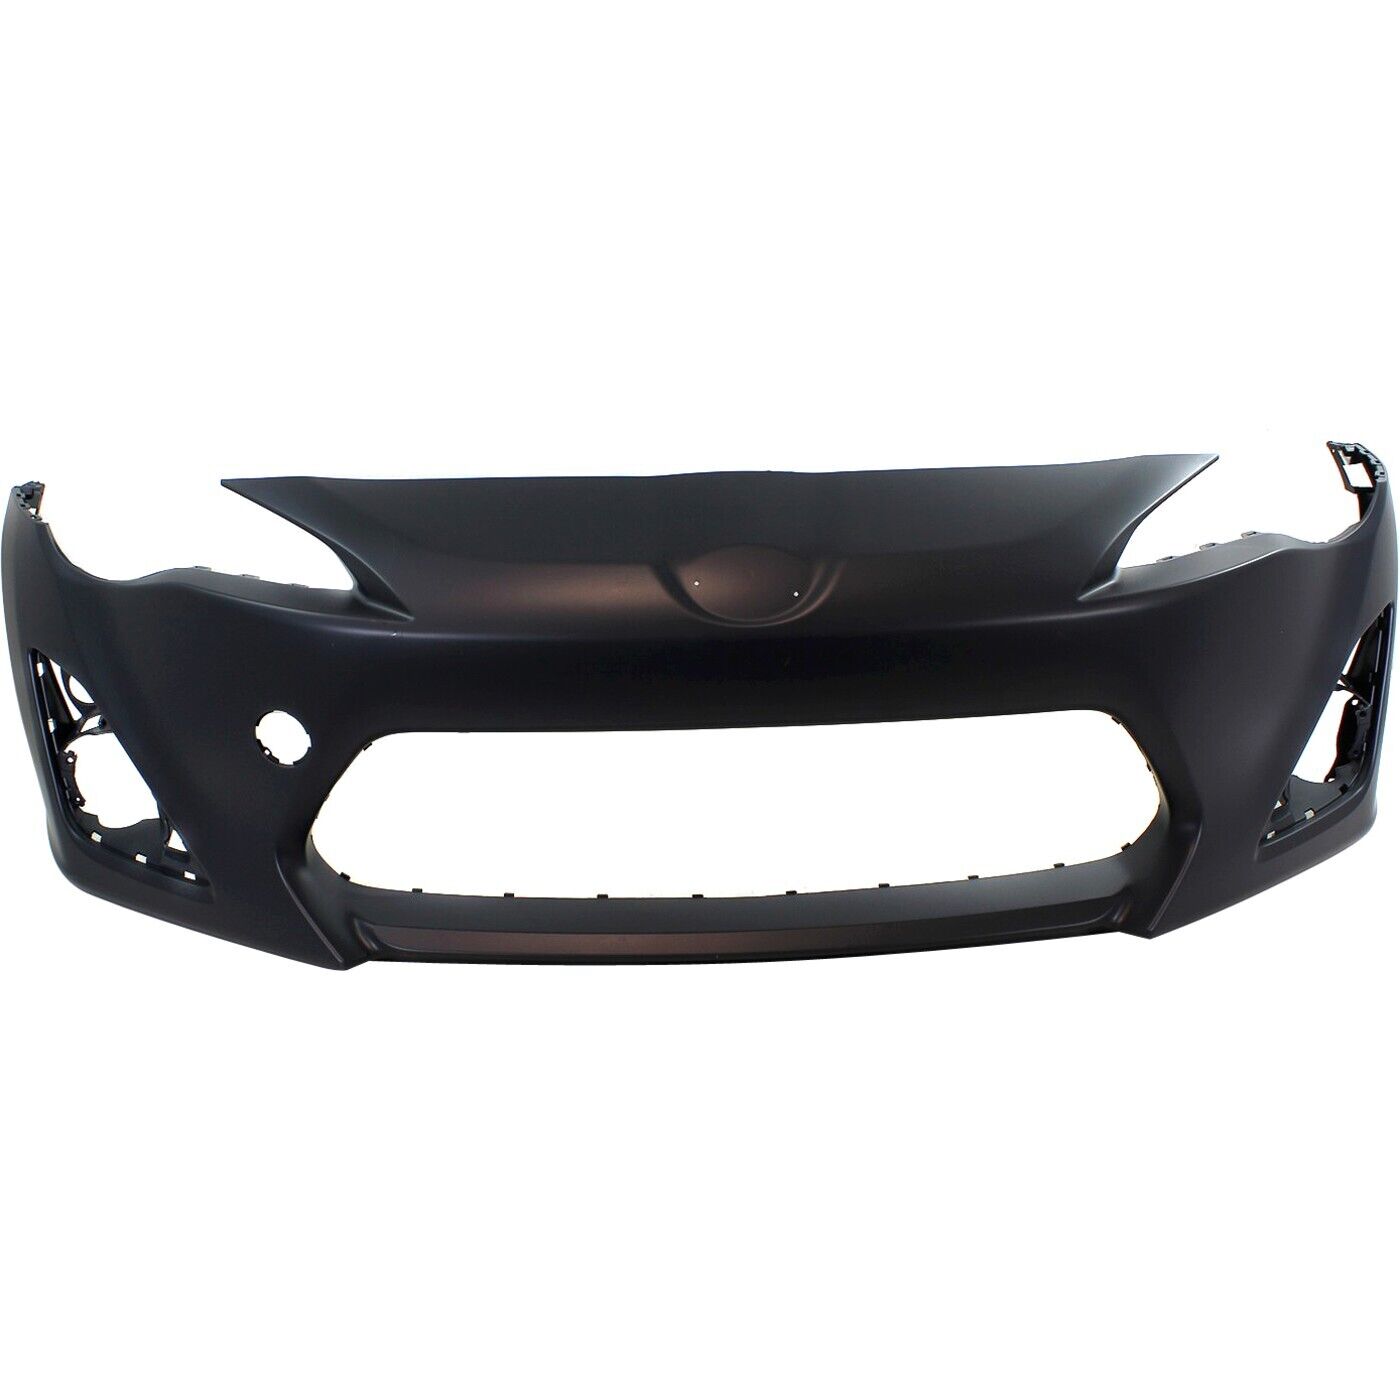 Bumper Cover For 2013-16 Scion FR-S with Fog Lamp Holes Front Primed SU00301484